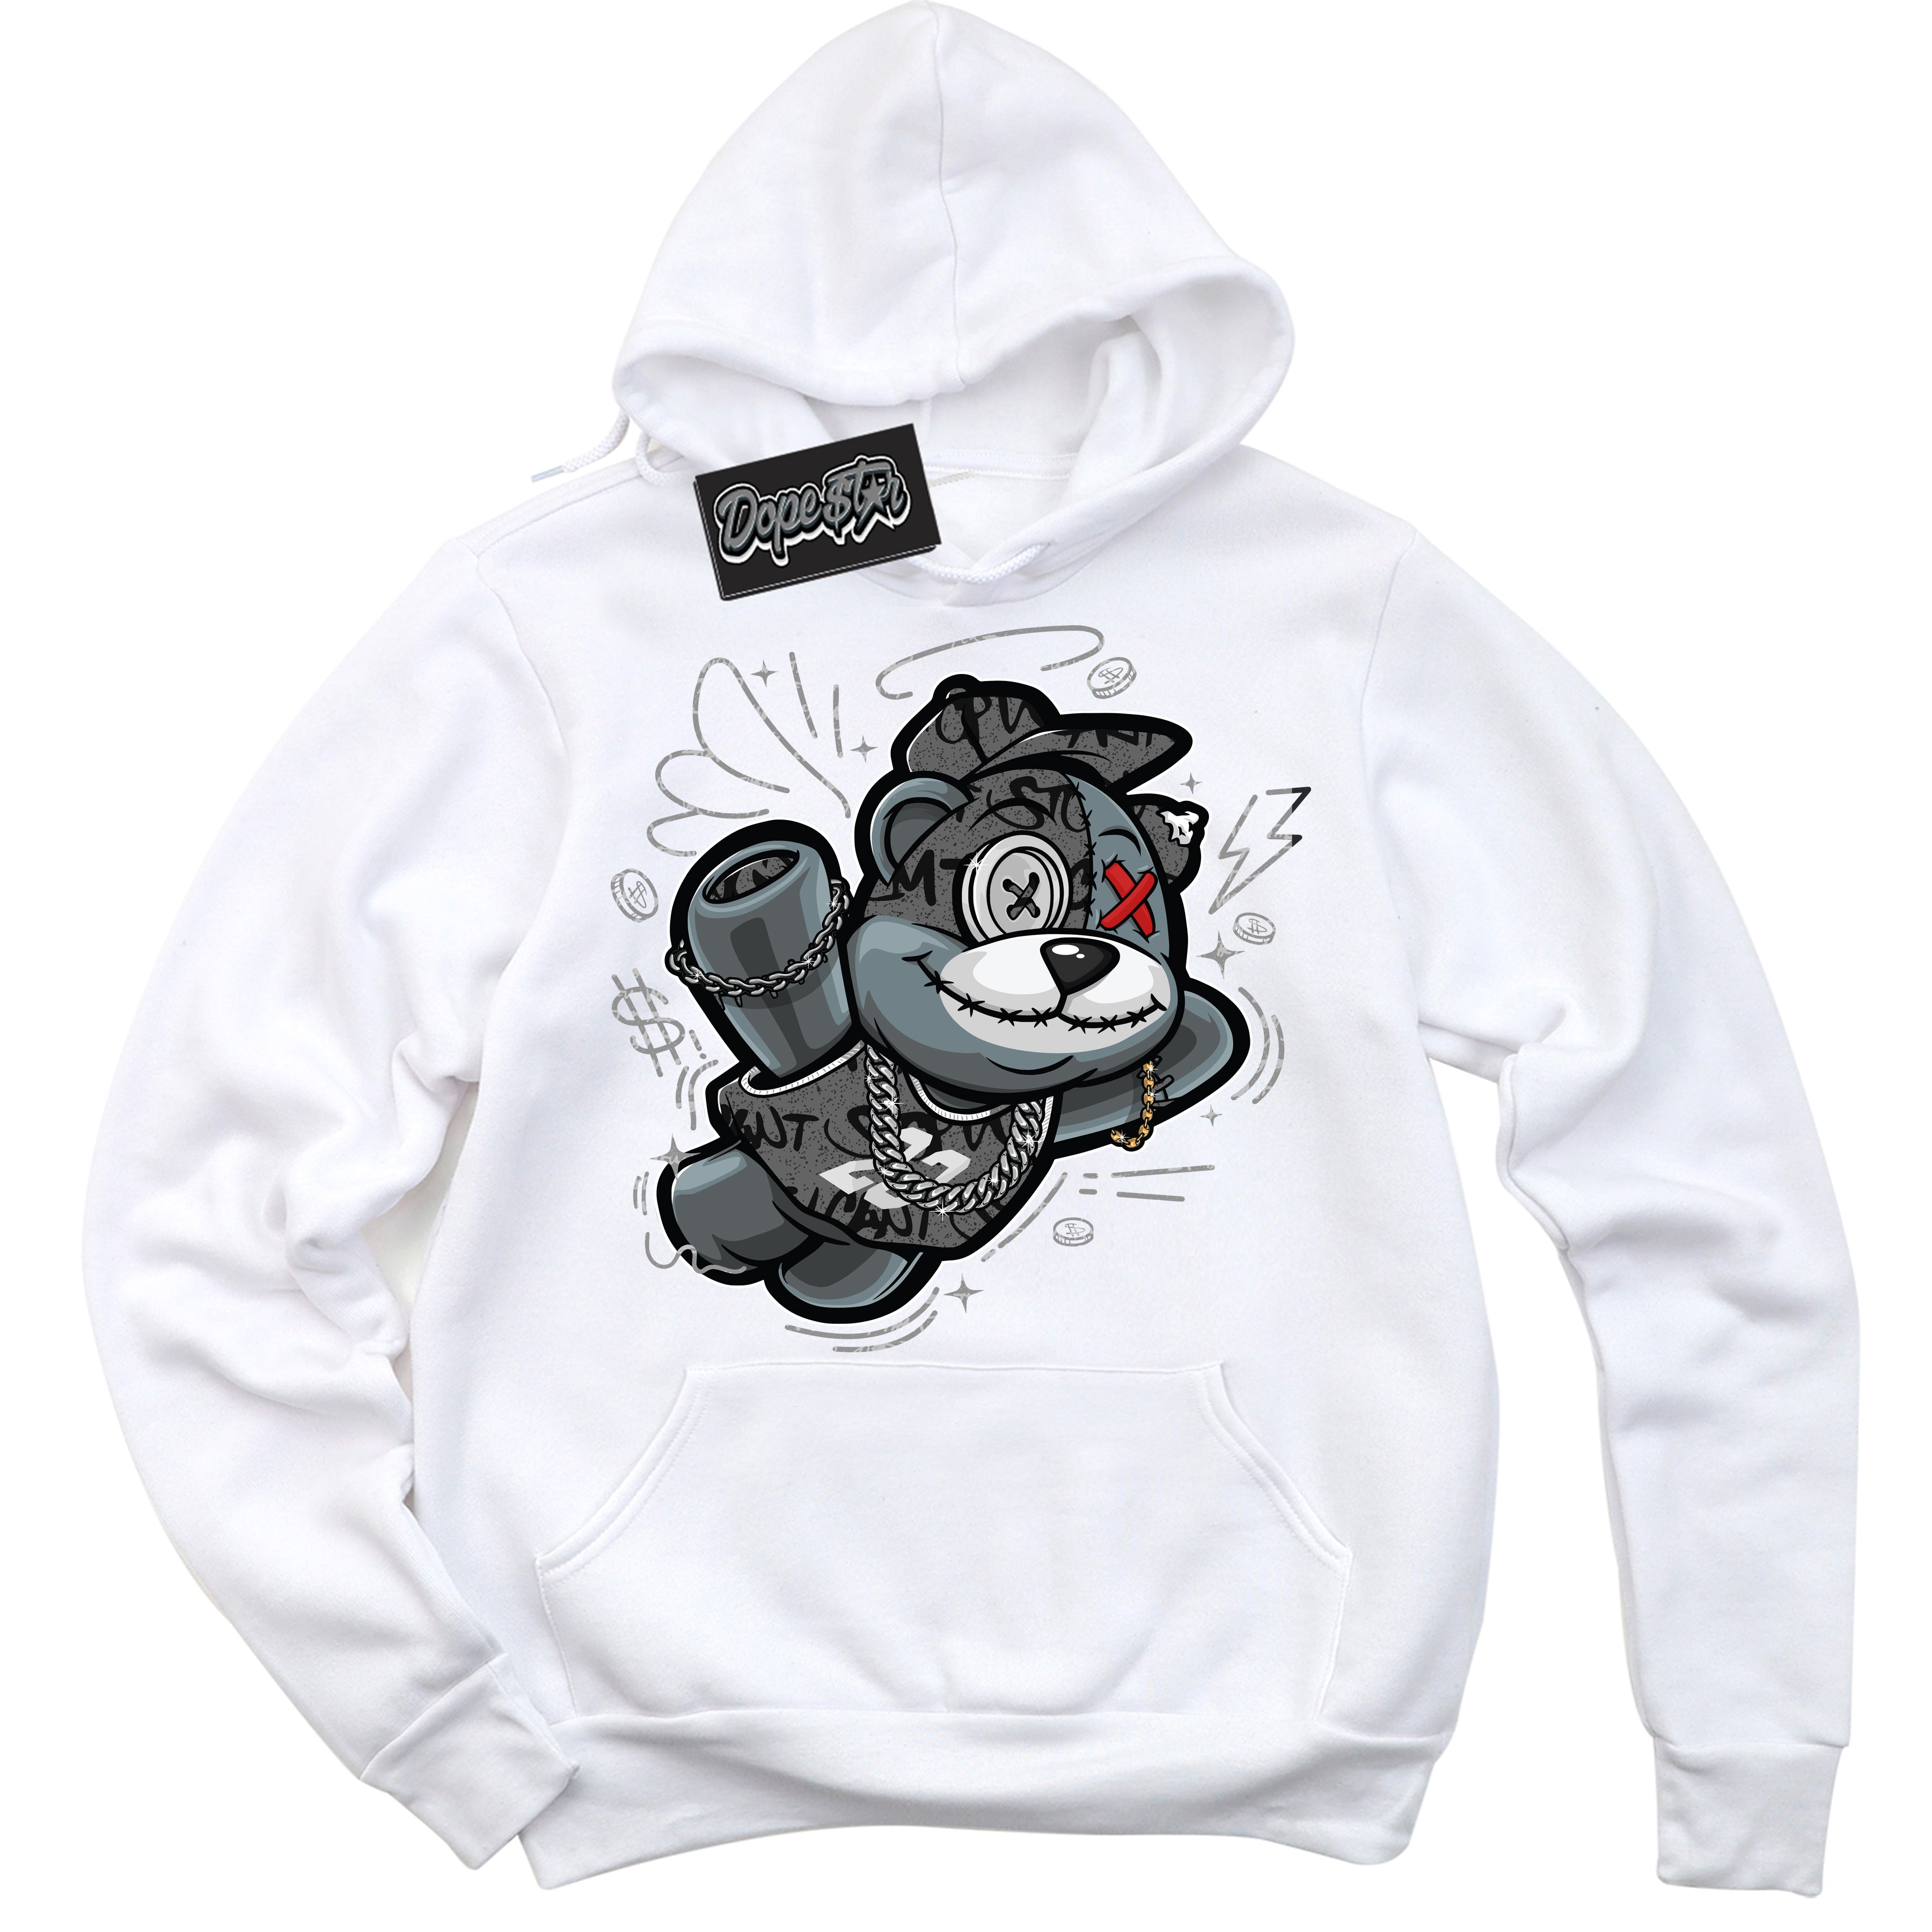 Cool White Hoodie with “ Slam Dunk Bear ”  design that Perfectly Matches Rebellionaire 1s Sneakers.